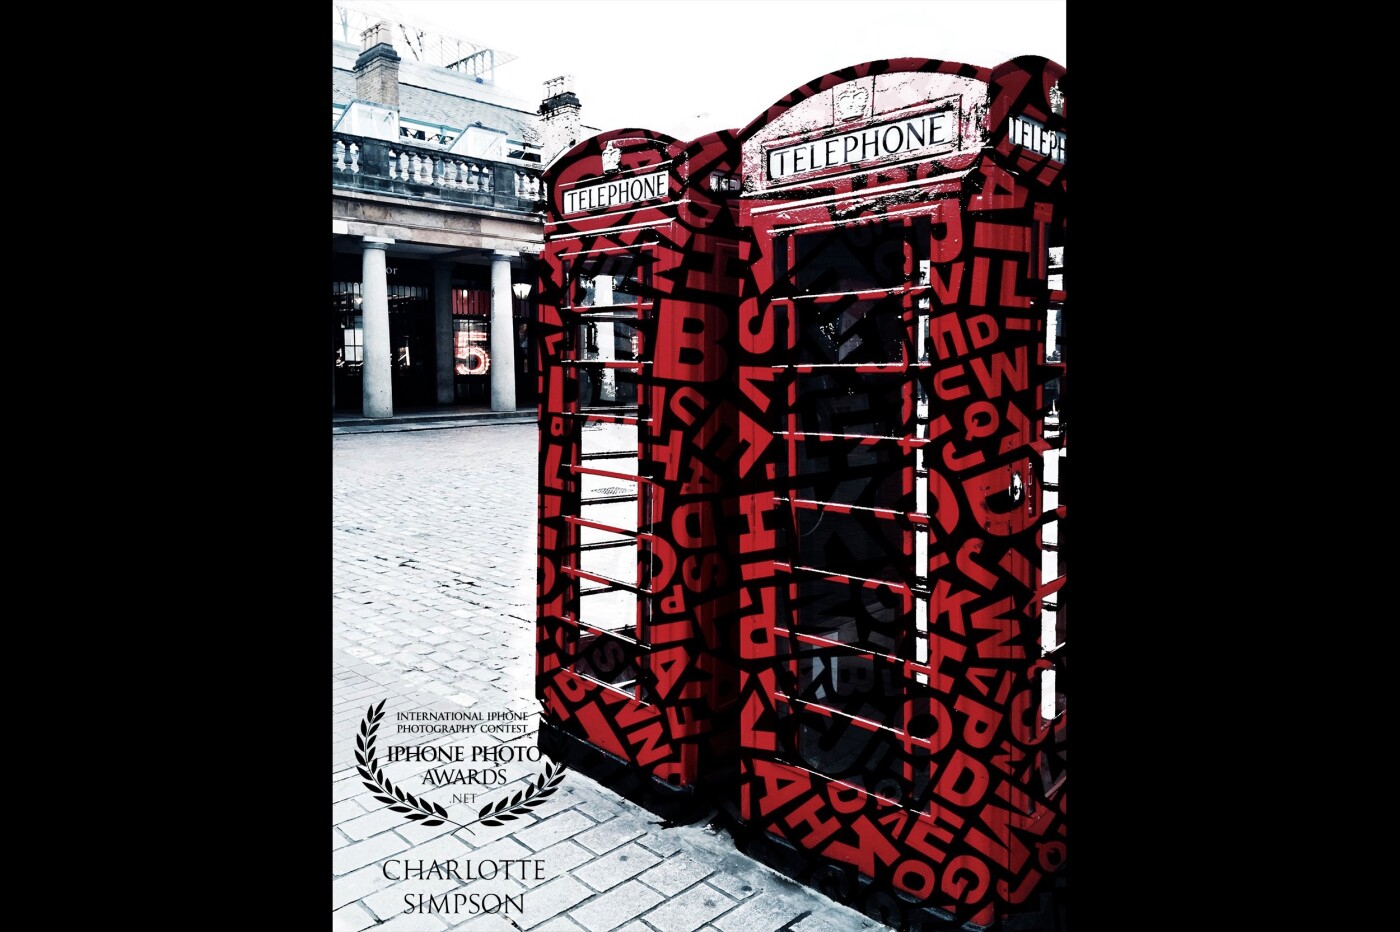 Wonderful to visit an area I used to work in in the 1980s.  Covent Garden,  such a beautiful part of London,  overflowing with style and creativity.  Let’s hope telephone boxes get to stay in London as thy are such a part of our culture.  <br />
<br />
